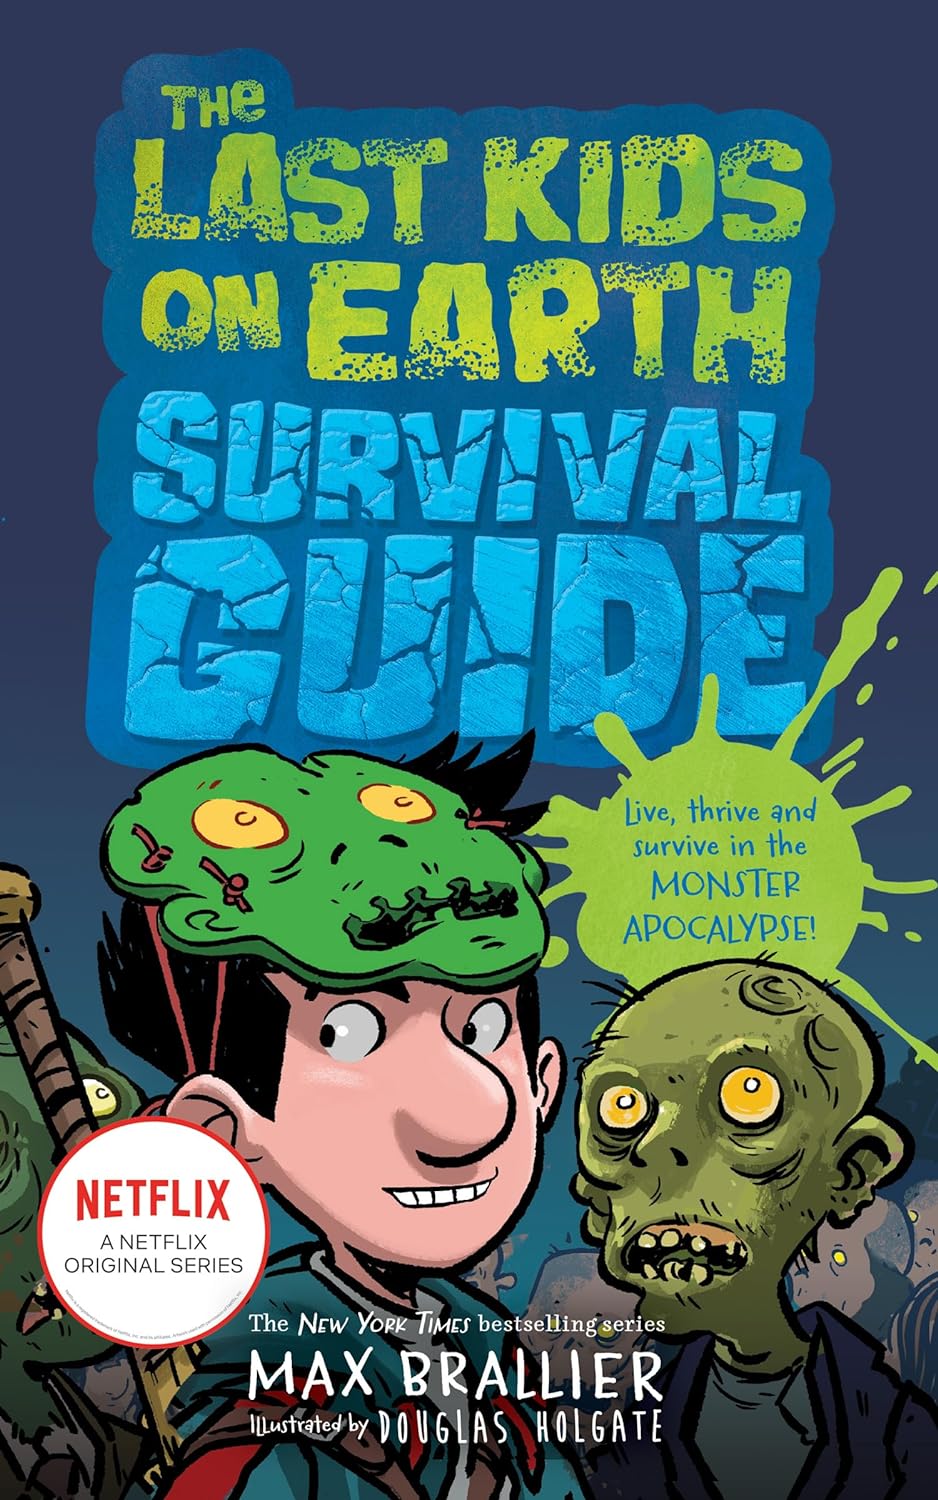 Grab the Last Kids on Earth Survival Guide - Limited-Time Specials!